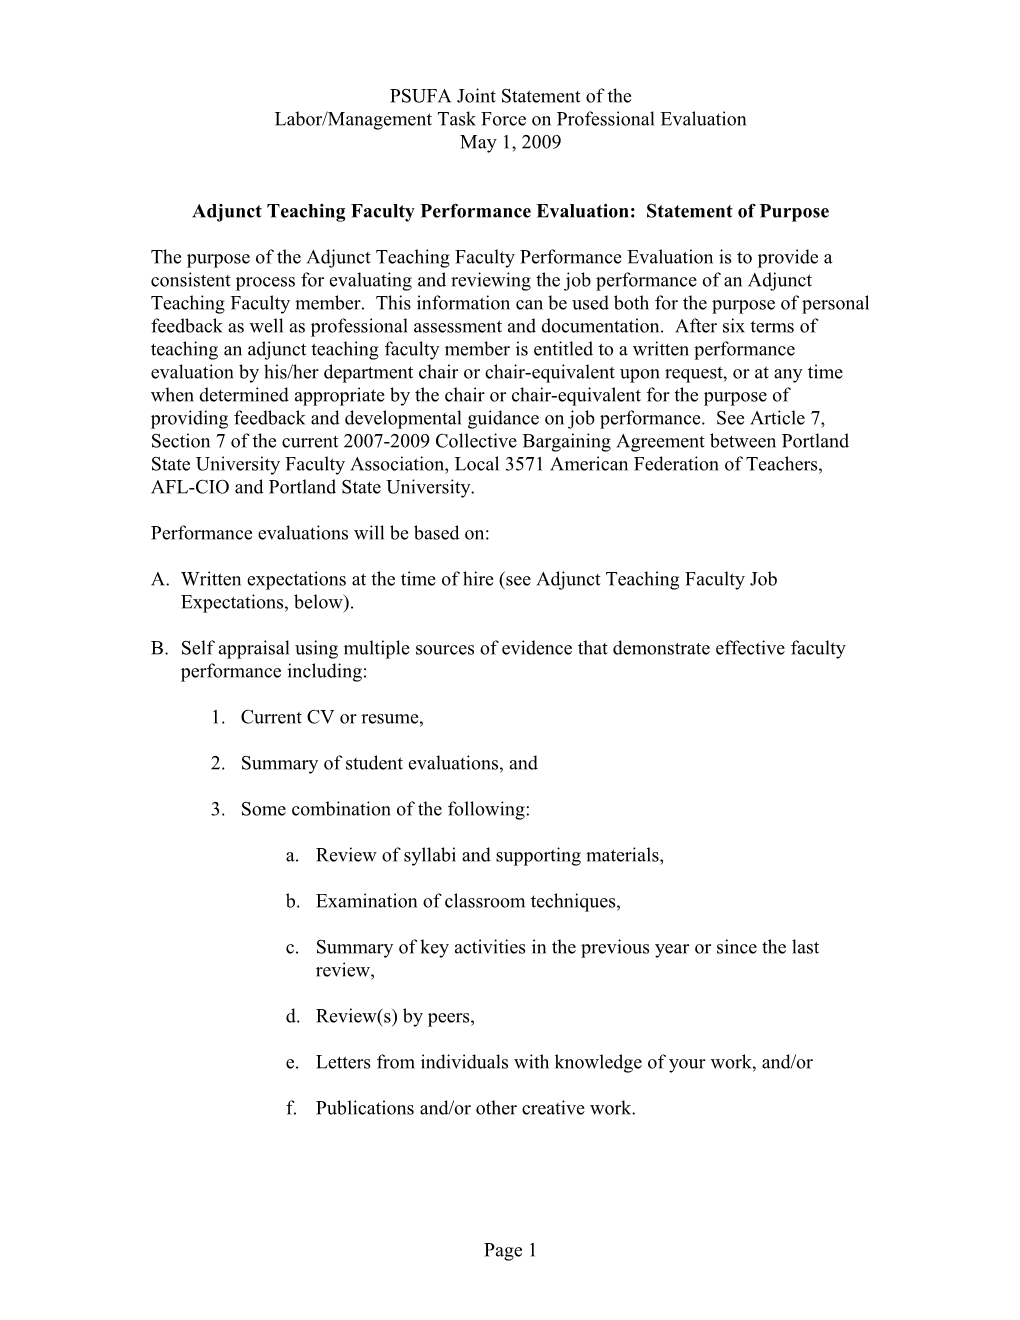 Adjunct Teaching Faculty Performance Evaluation: Statement of Purpose